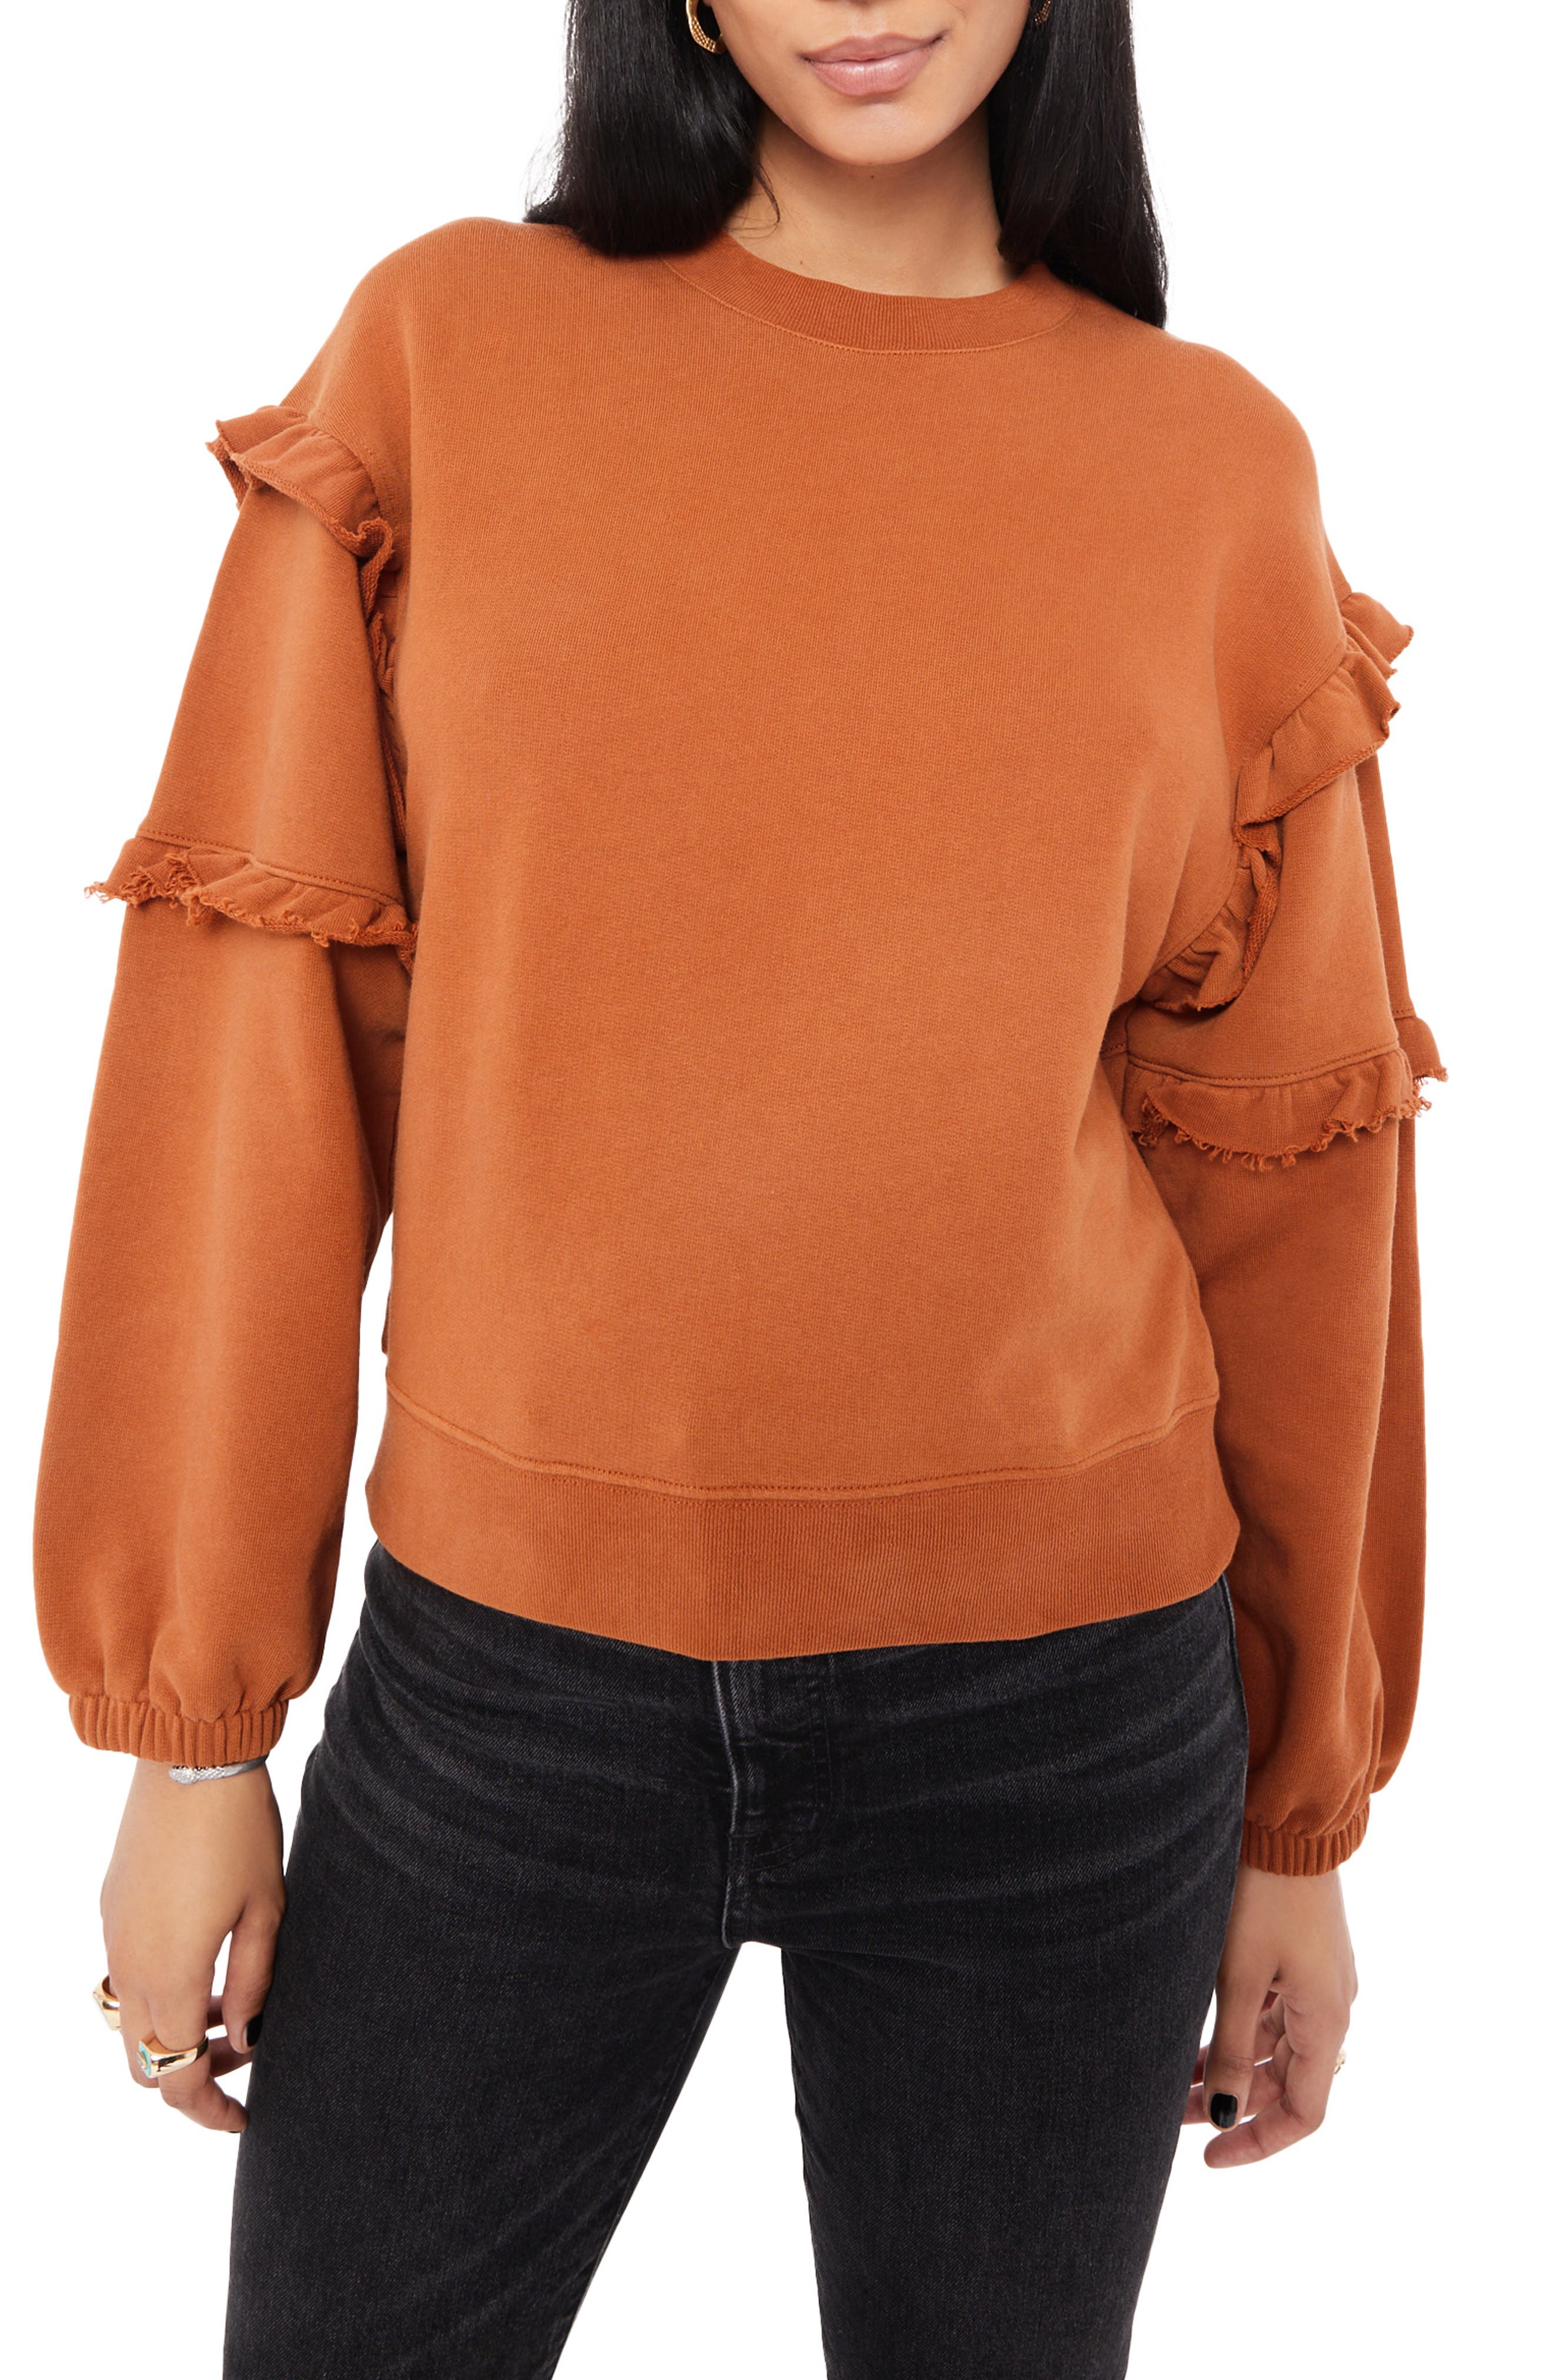 Rebecca Minkoff Evelyn Frill Balloon Sleeve Cotton Sweatshirt in Terra at Nordstrom, Size X-Large